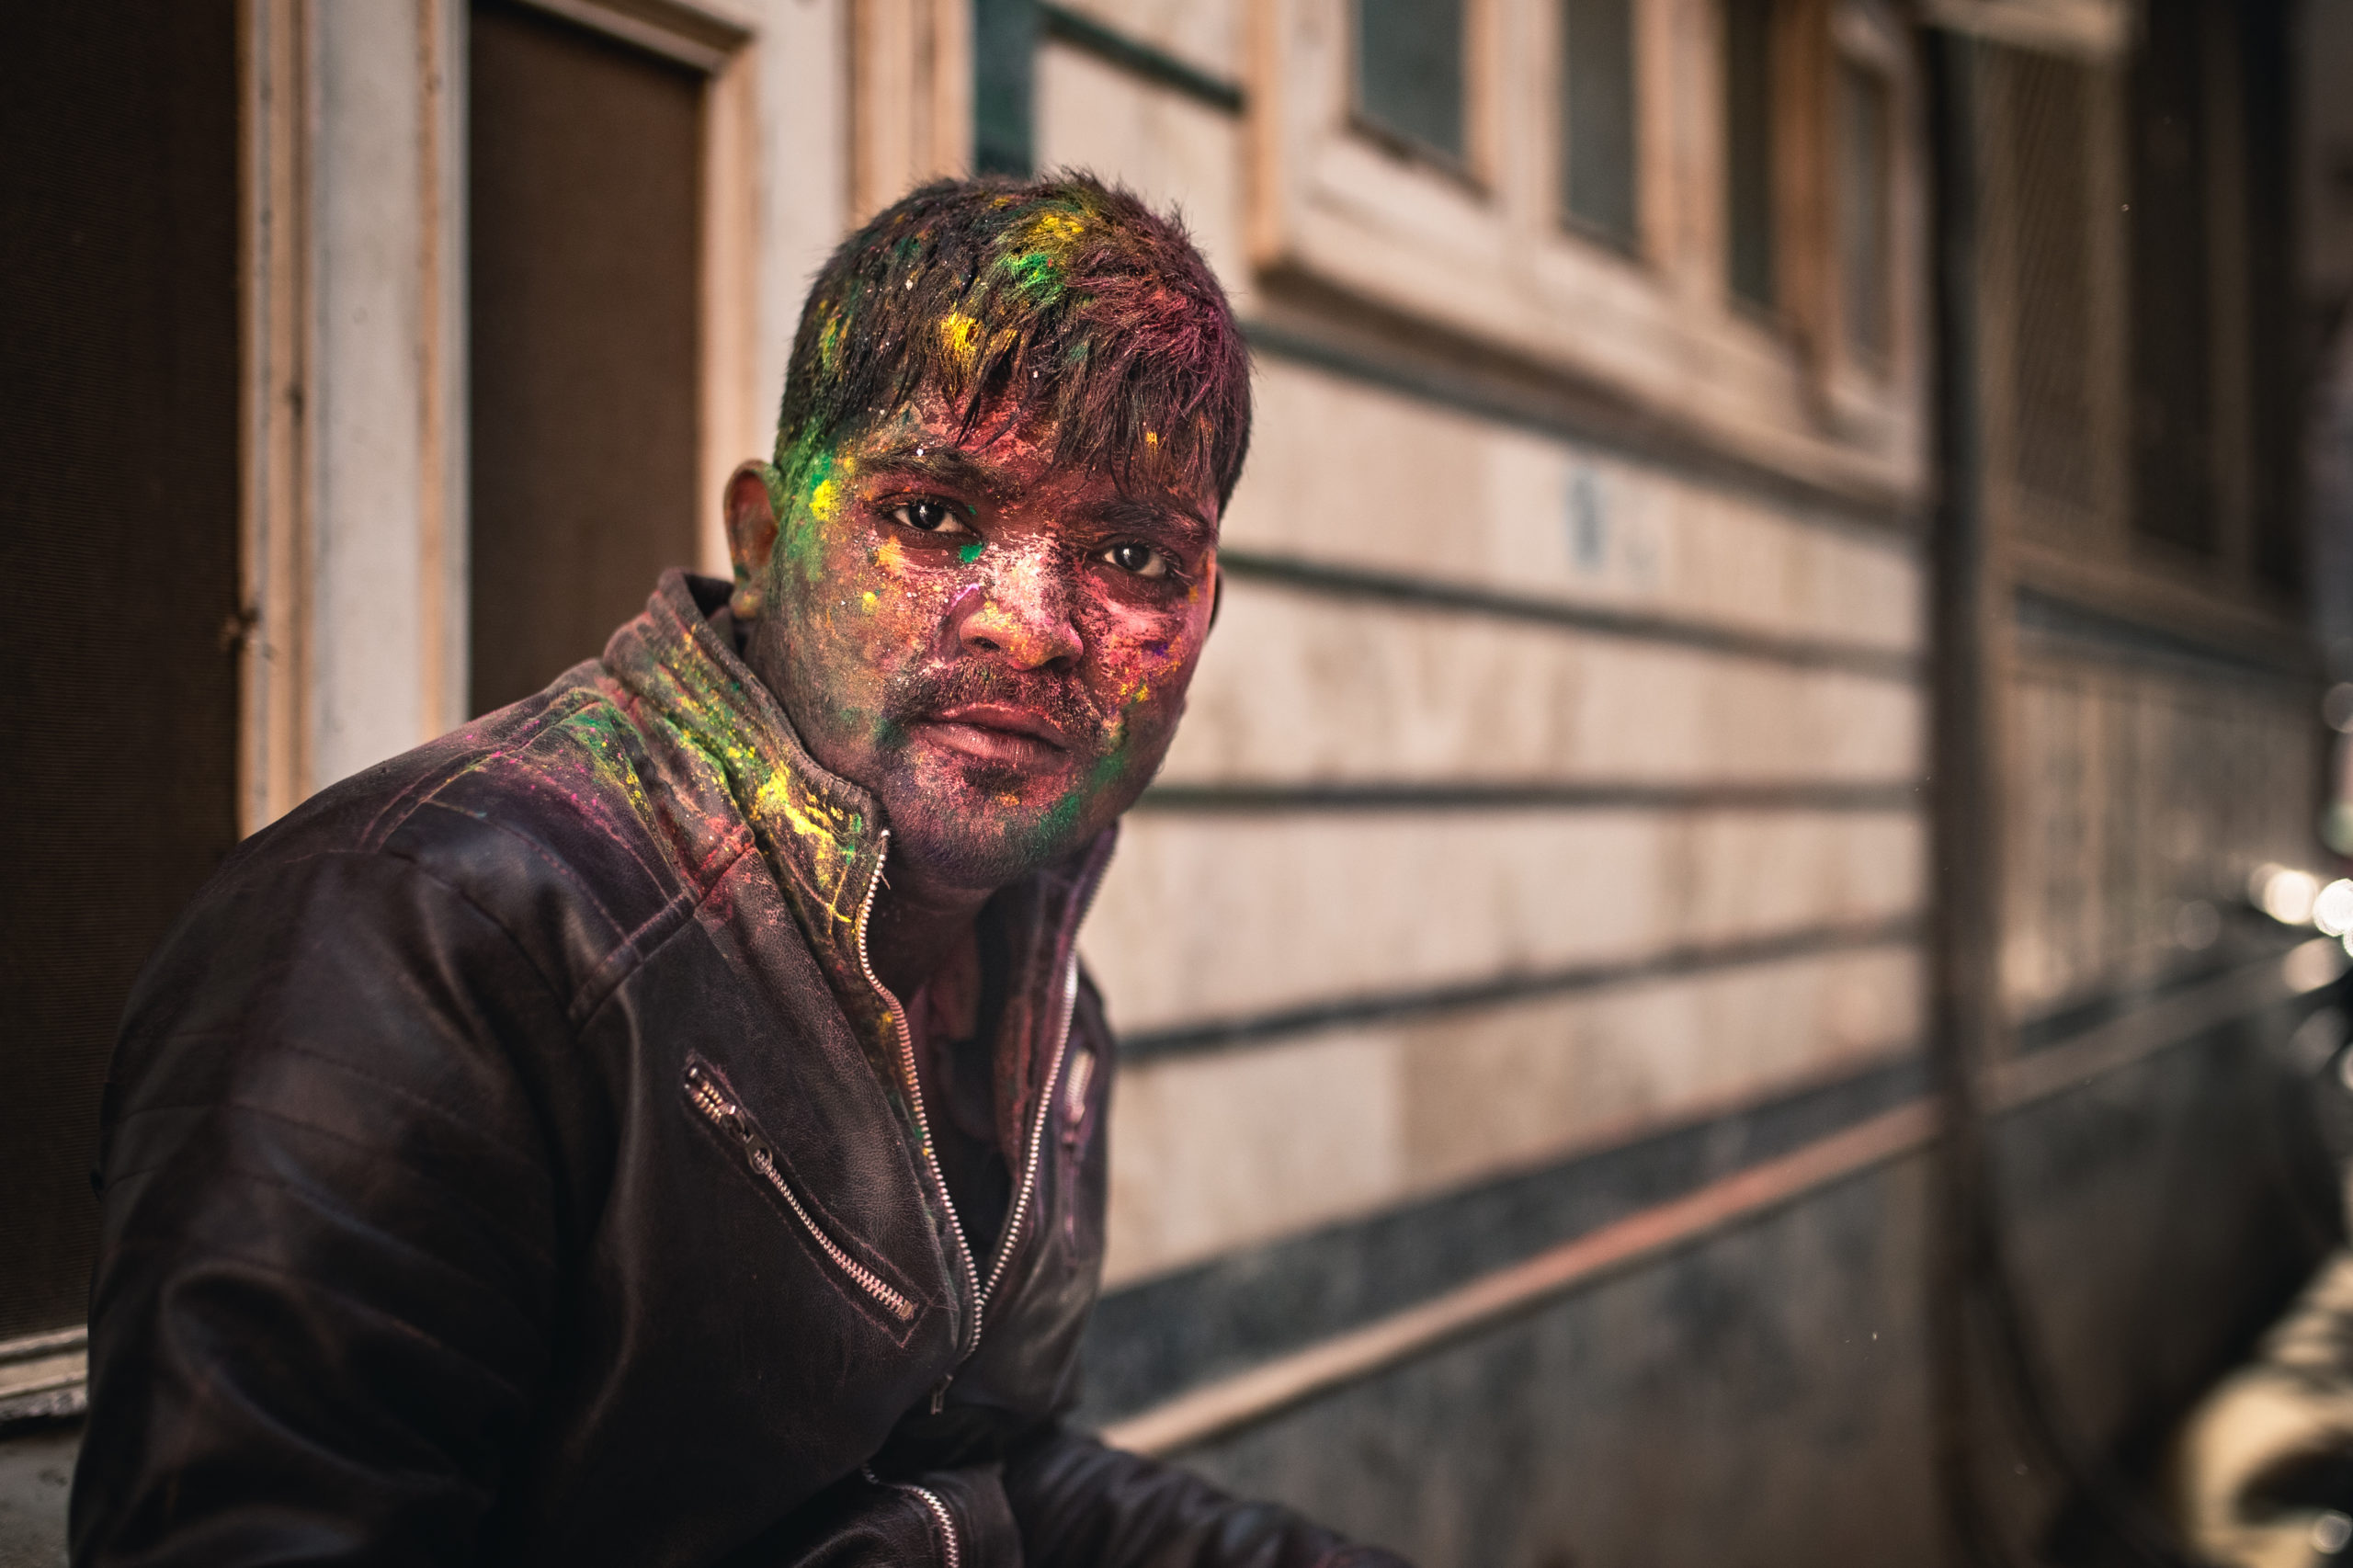 Portrait photography of a man with colorful holi powder covering his face in the streets of Vrindivan, India during the Holi Festival of Colors 2020